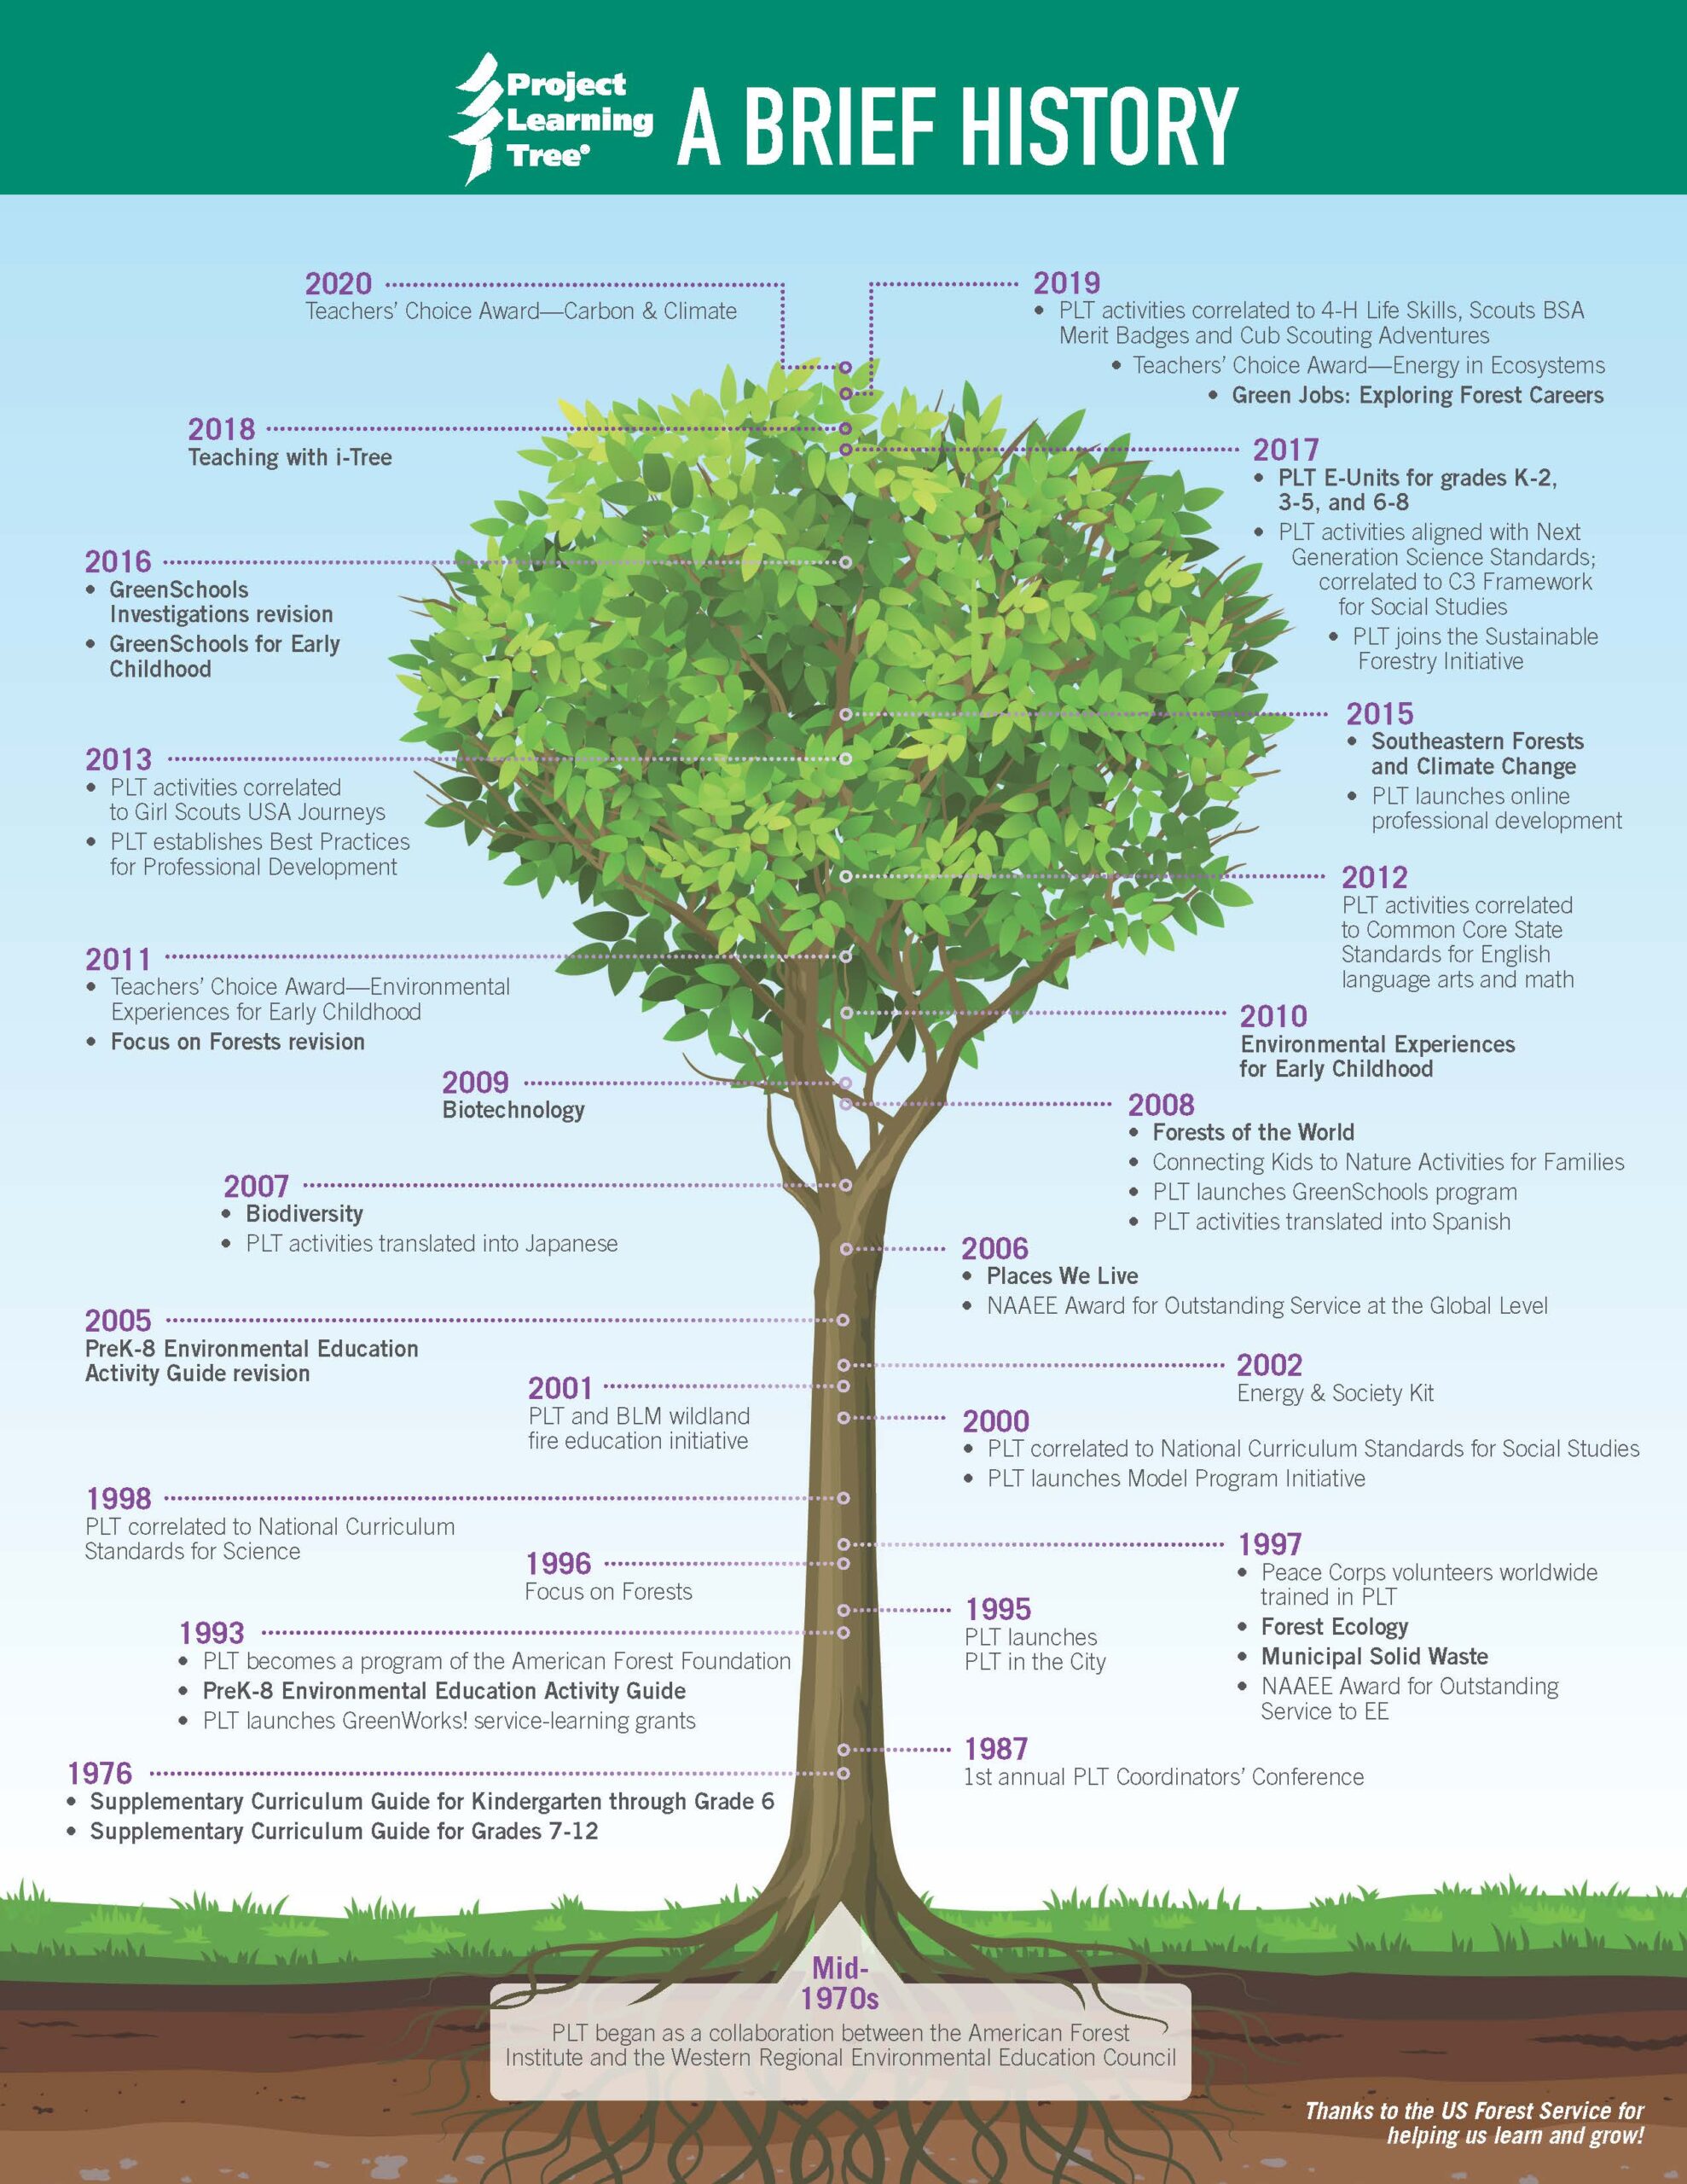 Project Learning Tree's history